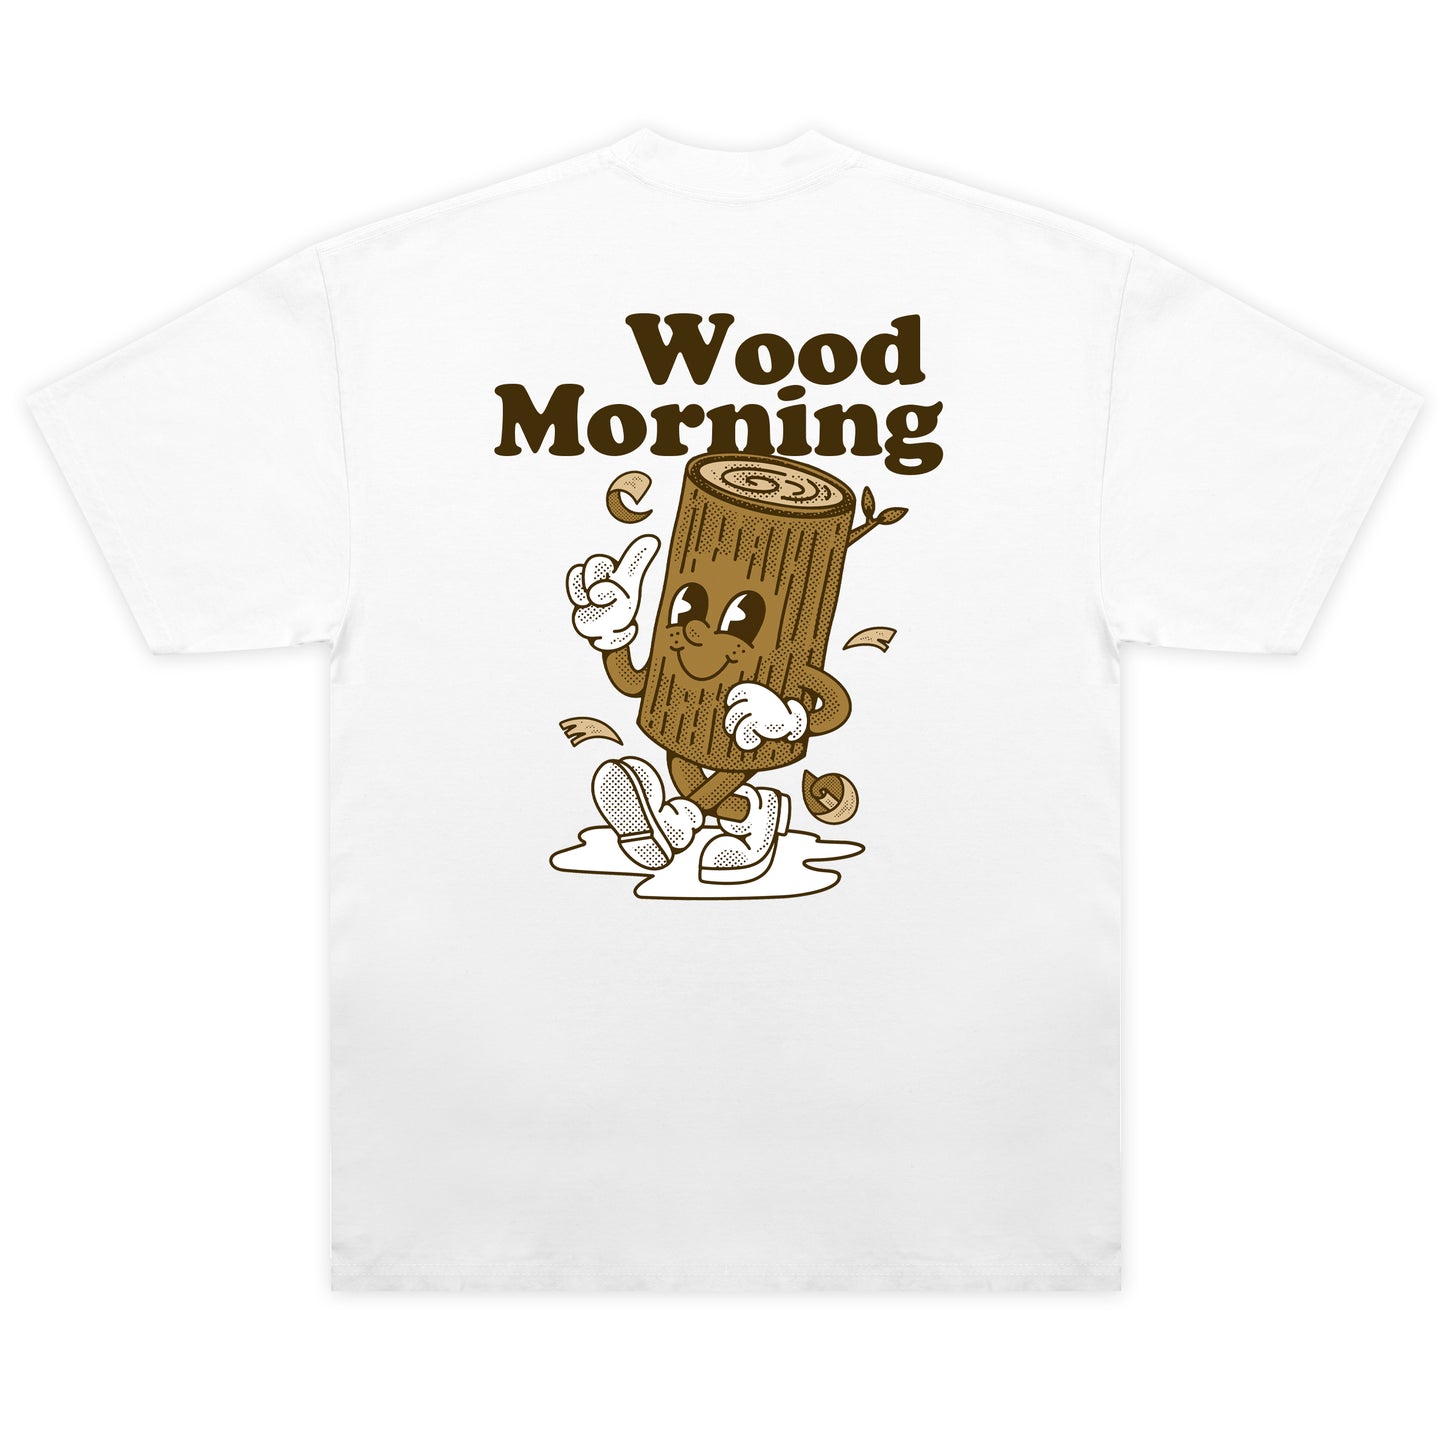 WOOD MORNING GRAPHIC TEE